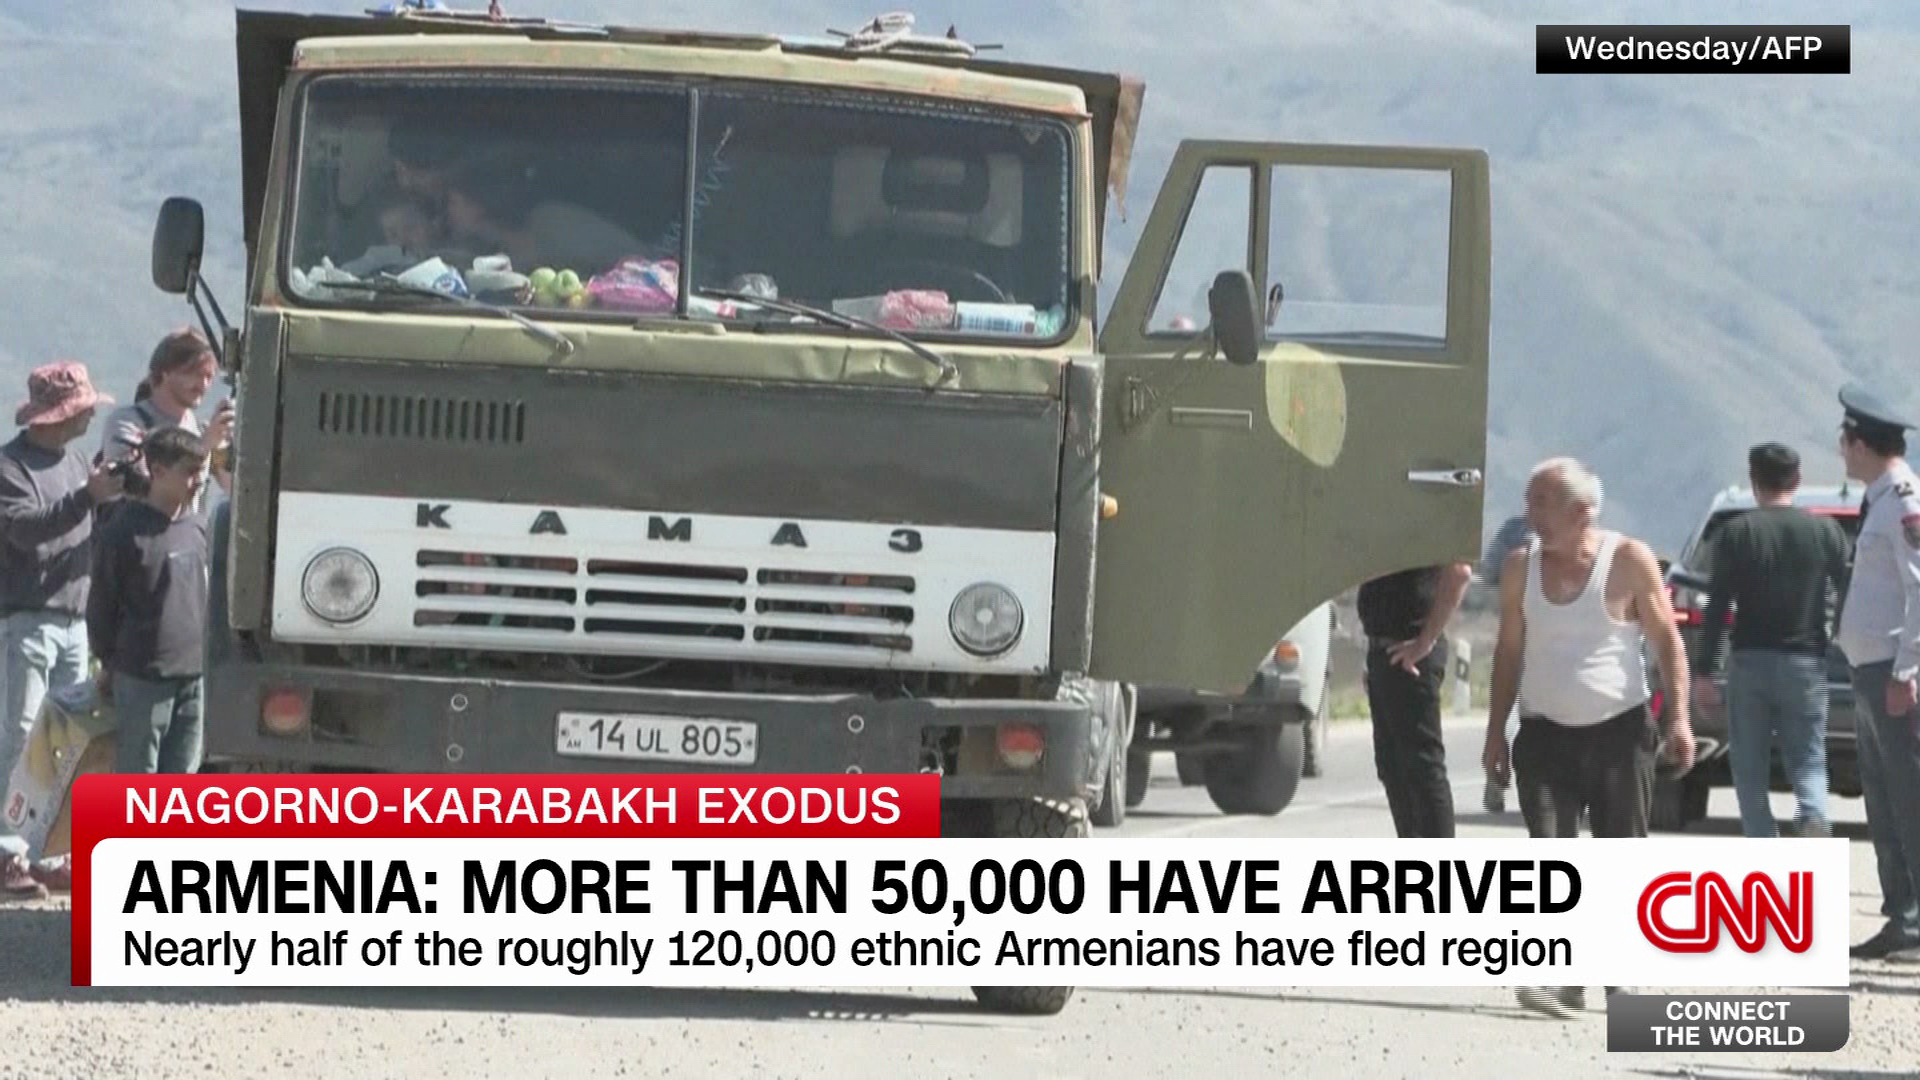 Over 100,000 Armenians have now fled disputed enclave Nagorno-Karabakh -  ABC News